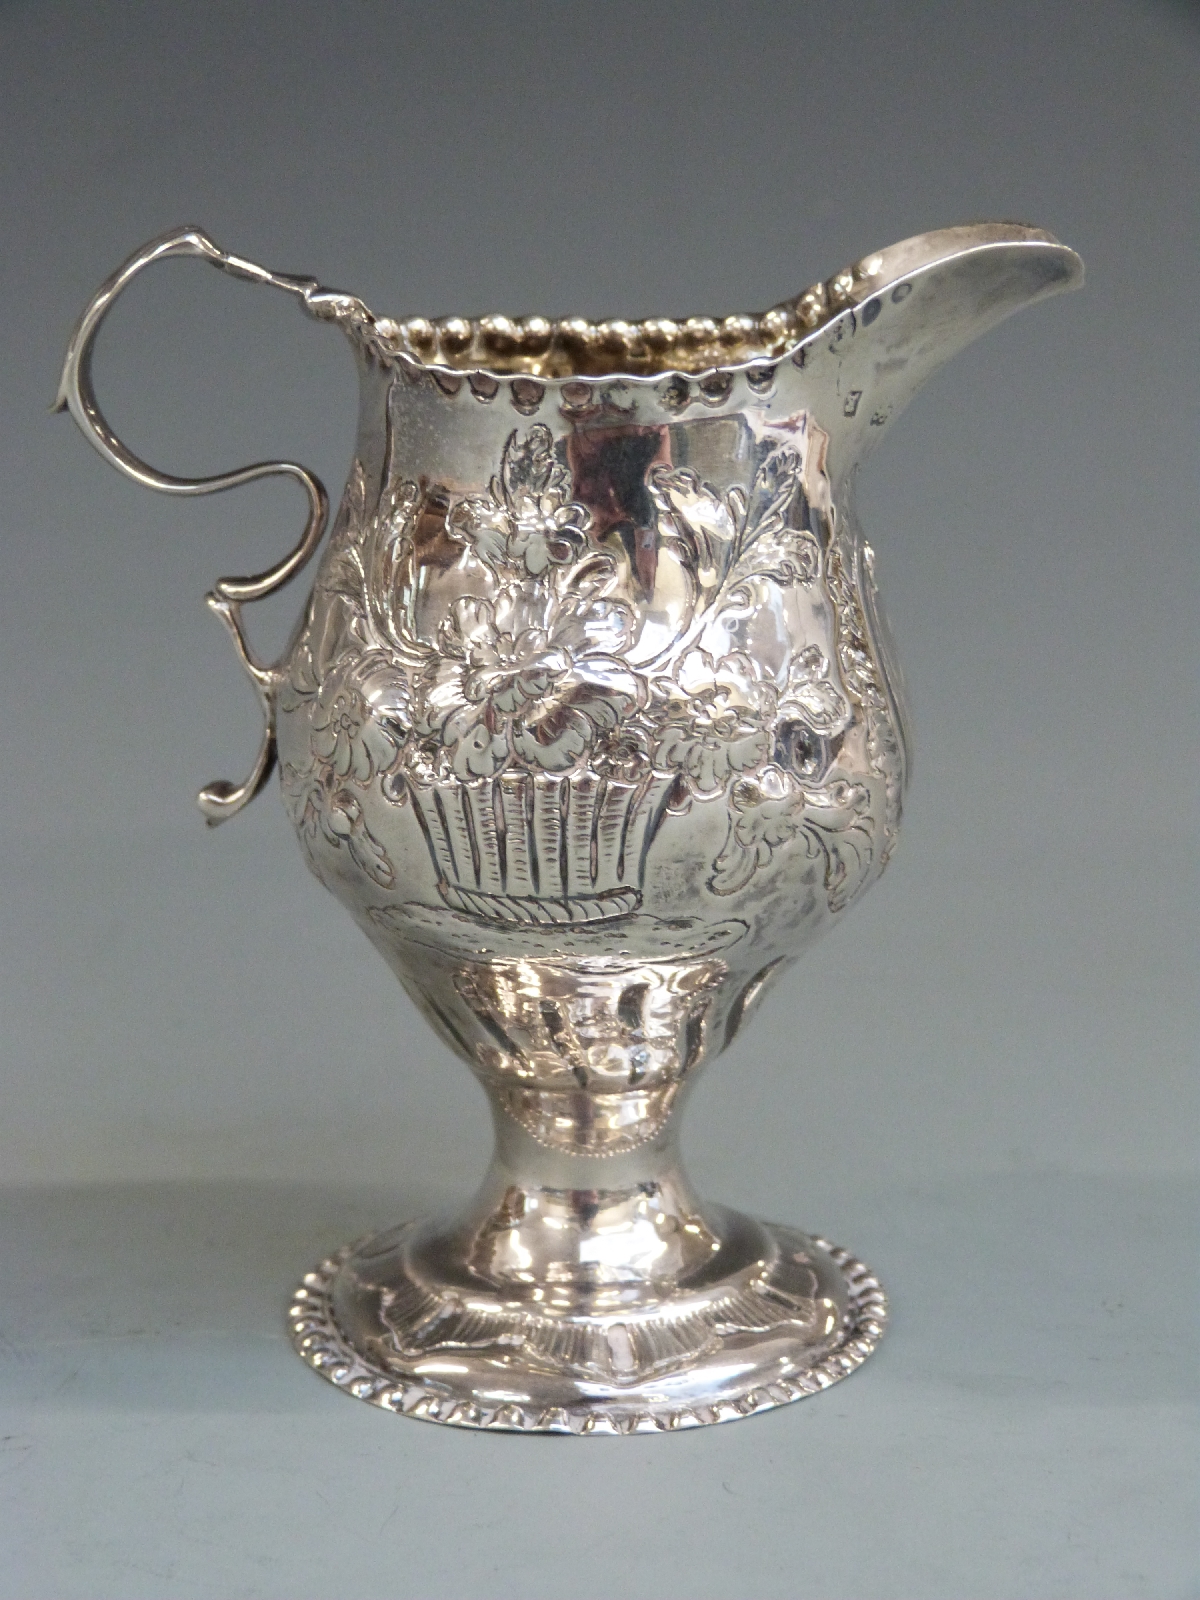 George II hallmarked silver jug with embossed decoration, London 1759 maker's mark rubbed, height